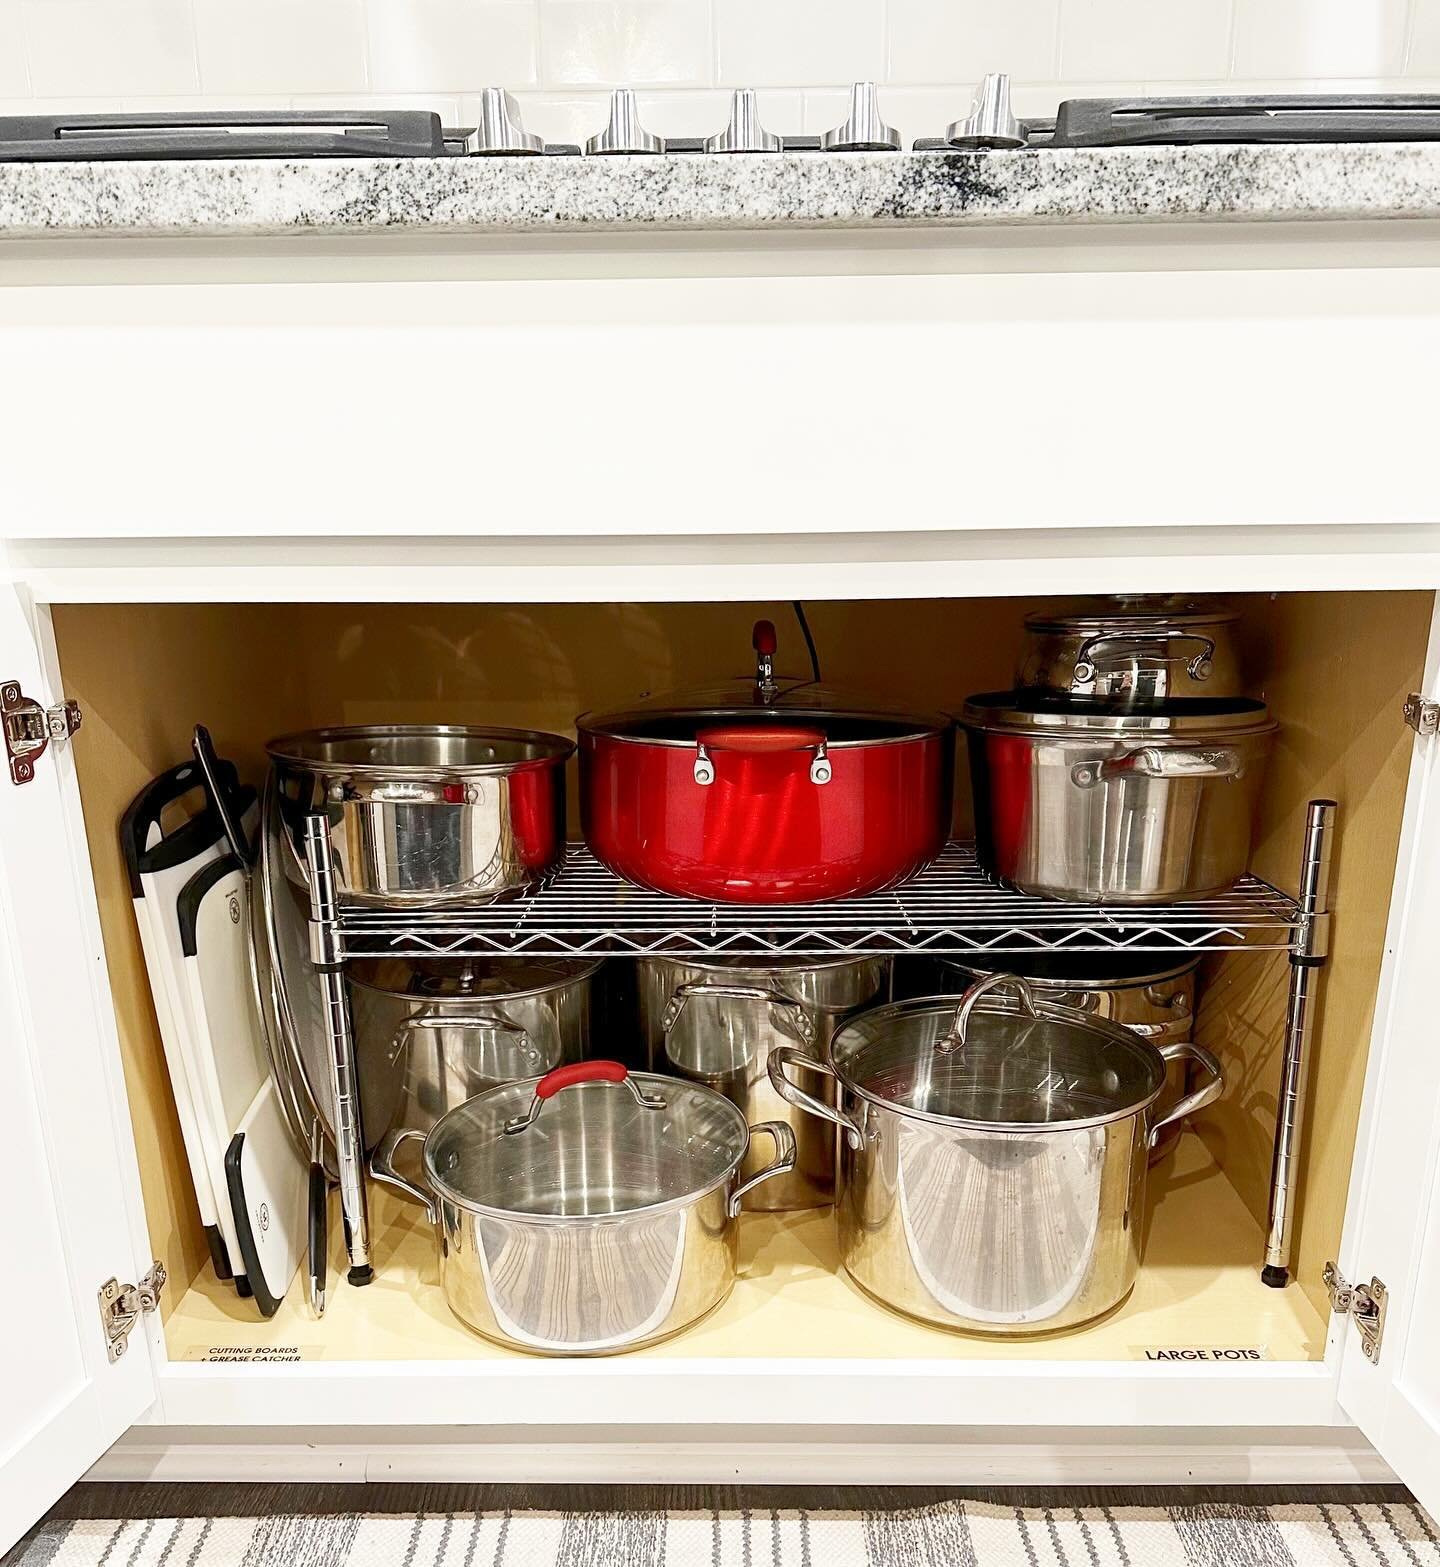 When one single product optimizes the space and gives you room for more. &thinsp;
&thinsp;
In this kitchen we used our favorite 1-shelf shelving under the stove to create more space and store all the big pots and pans. &thinsp;
&thinsp;
When organizi